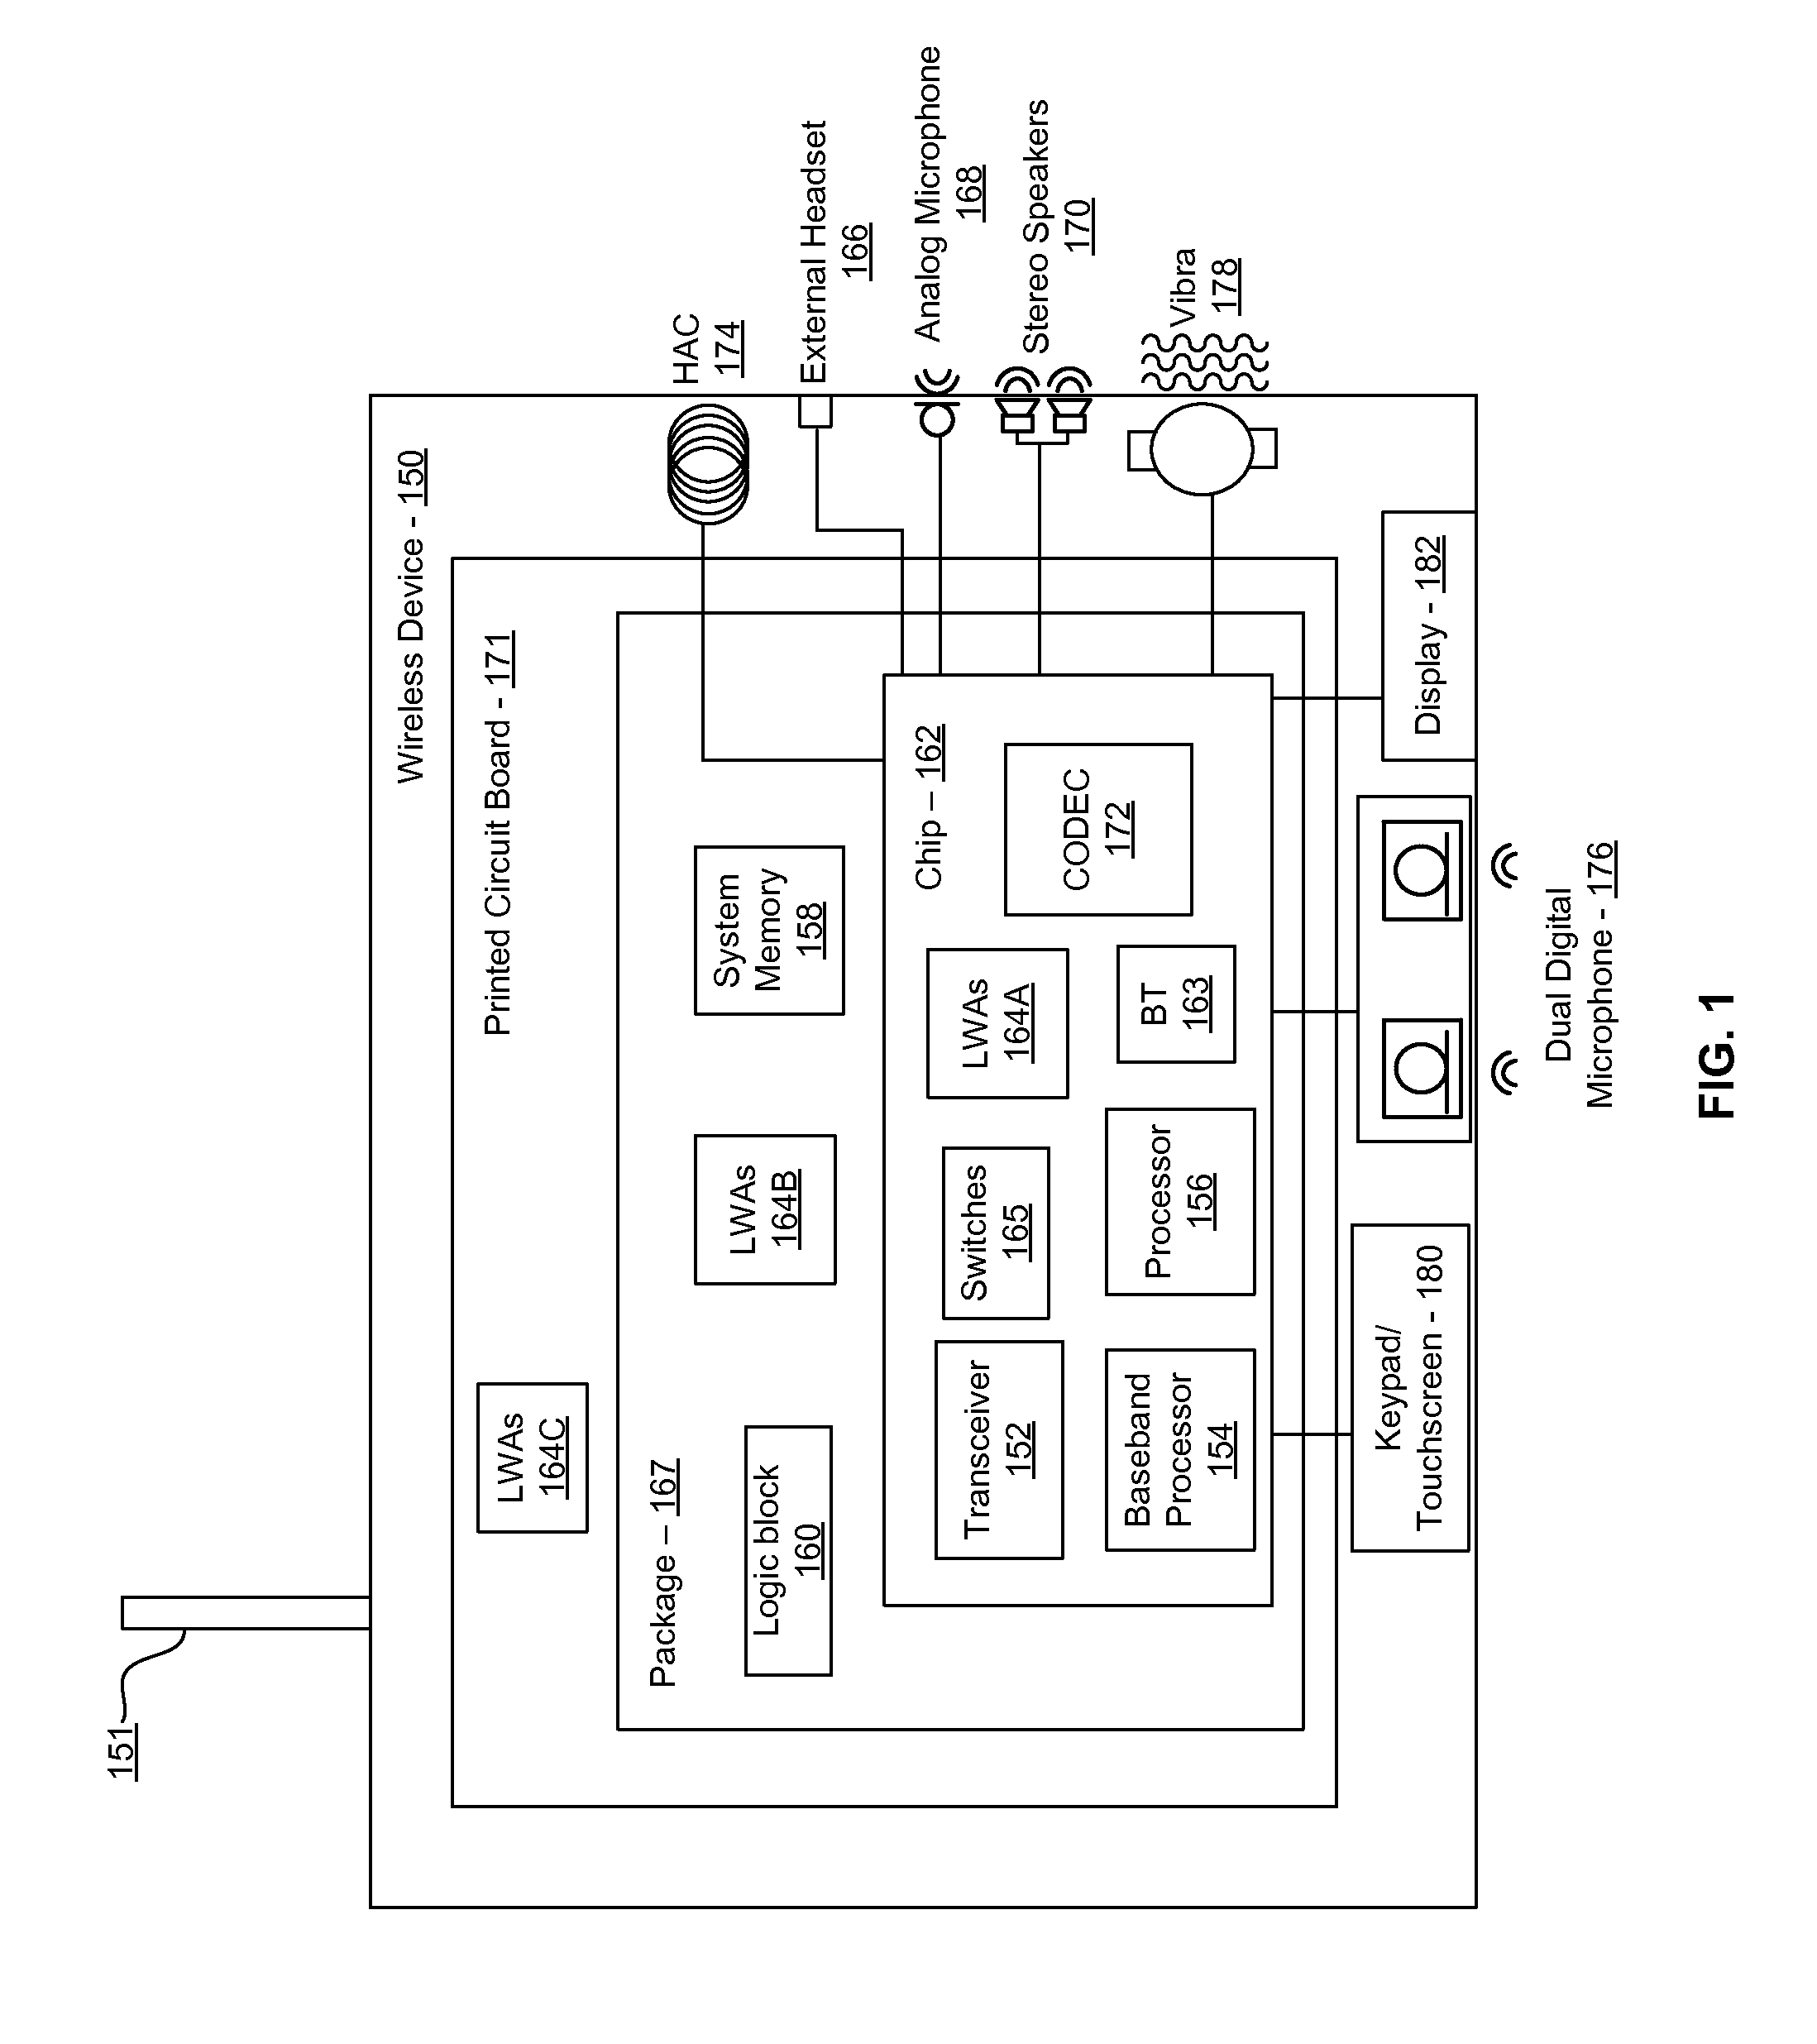 Method and system for a mesh network utilizing leaky wave antennas